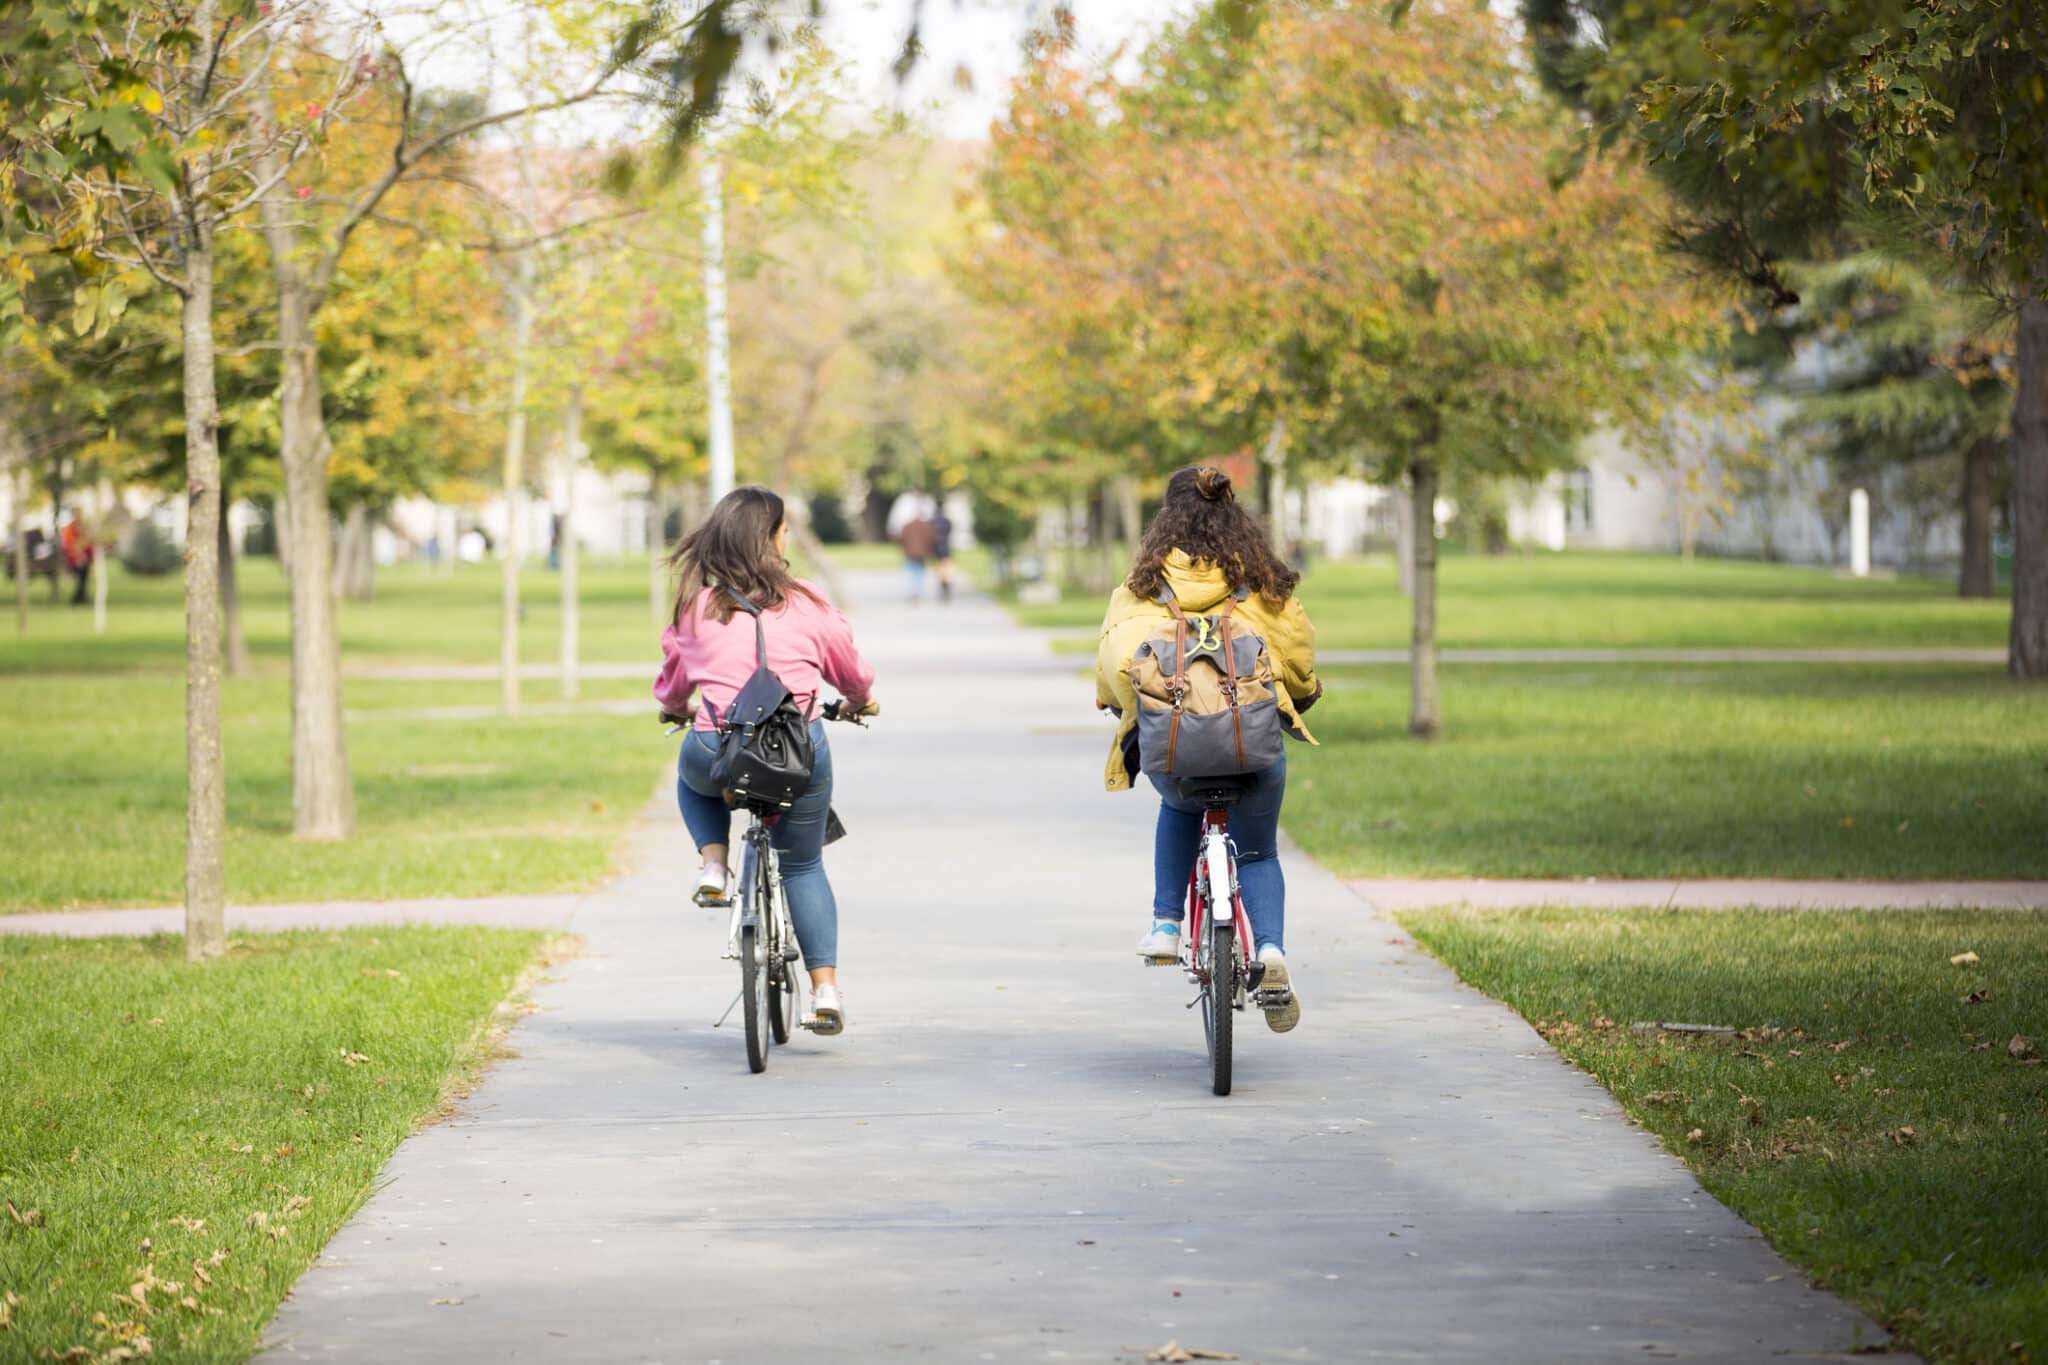 University students riding bicycles on sidewalk with trees and grass surrounding.